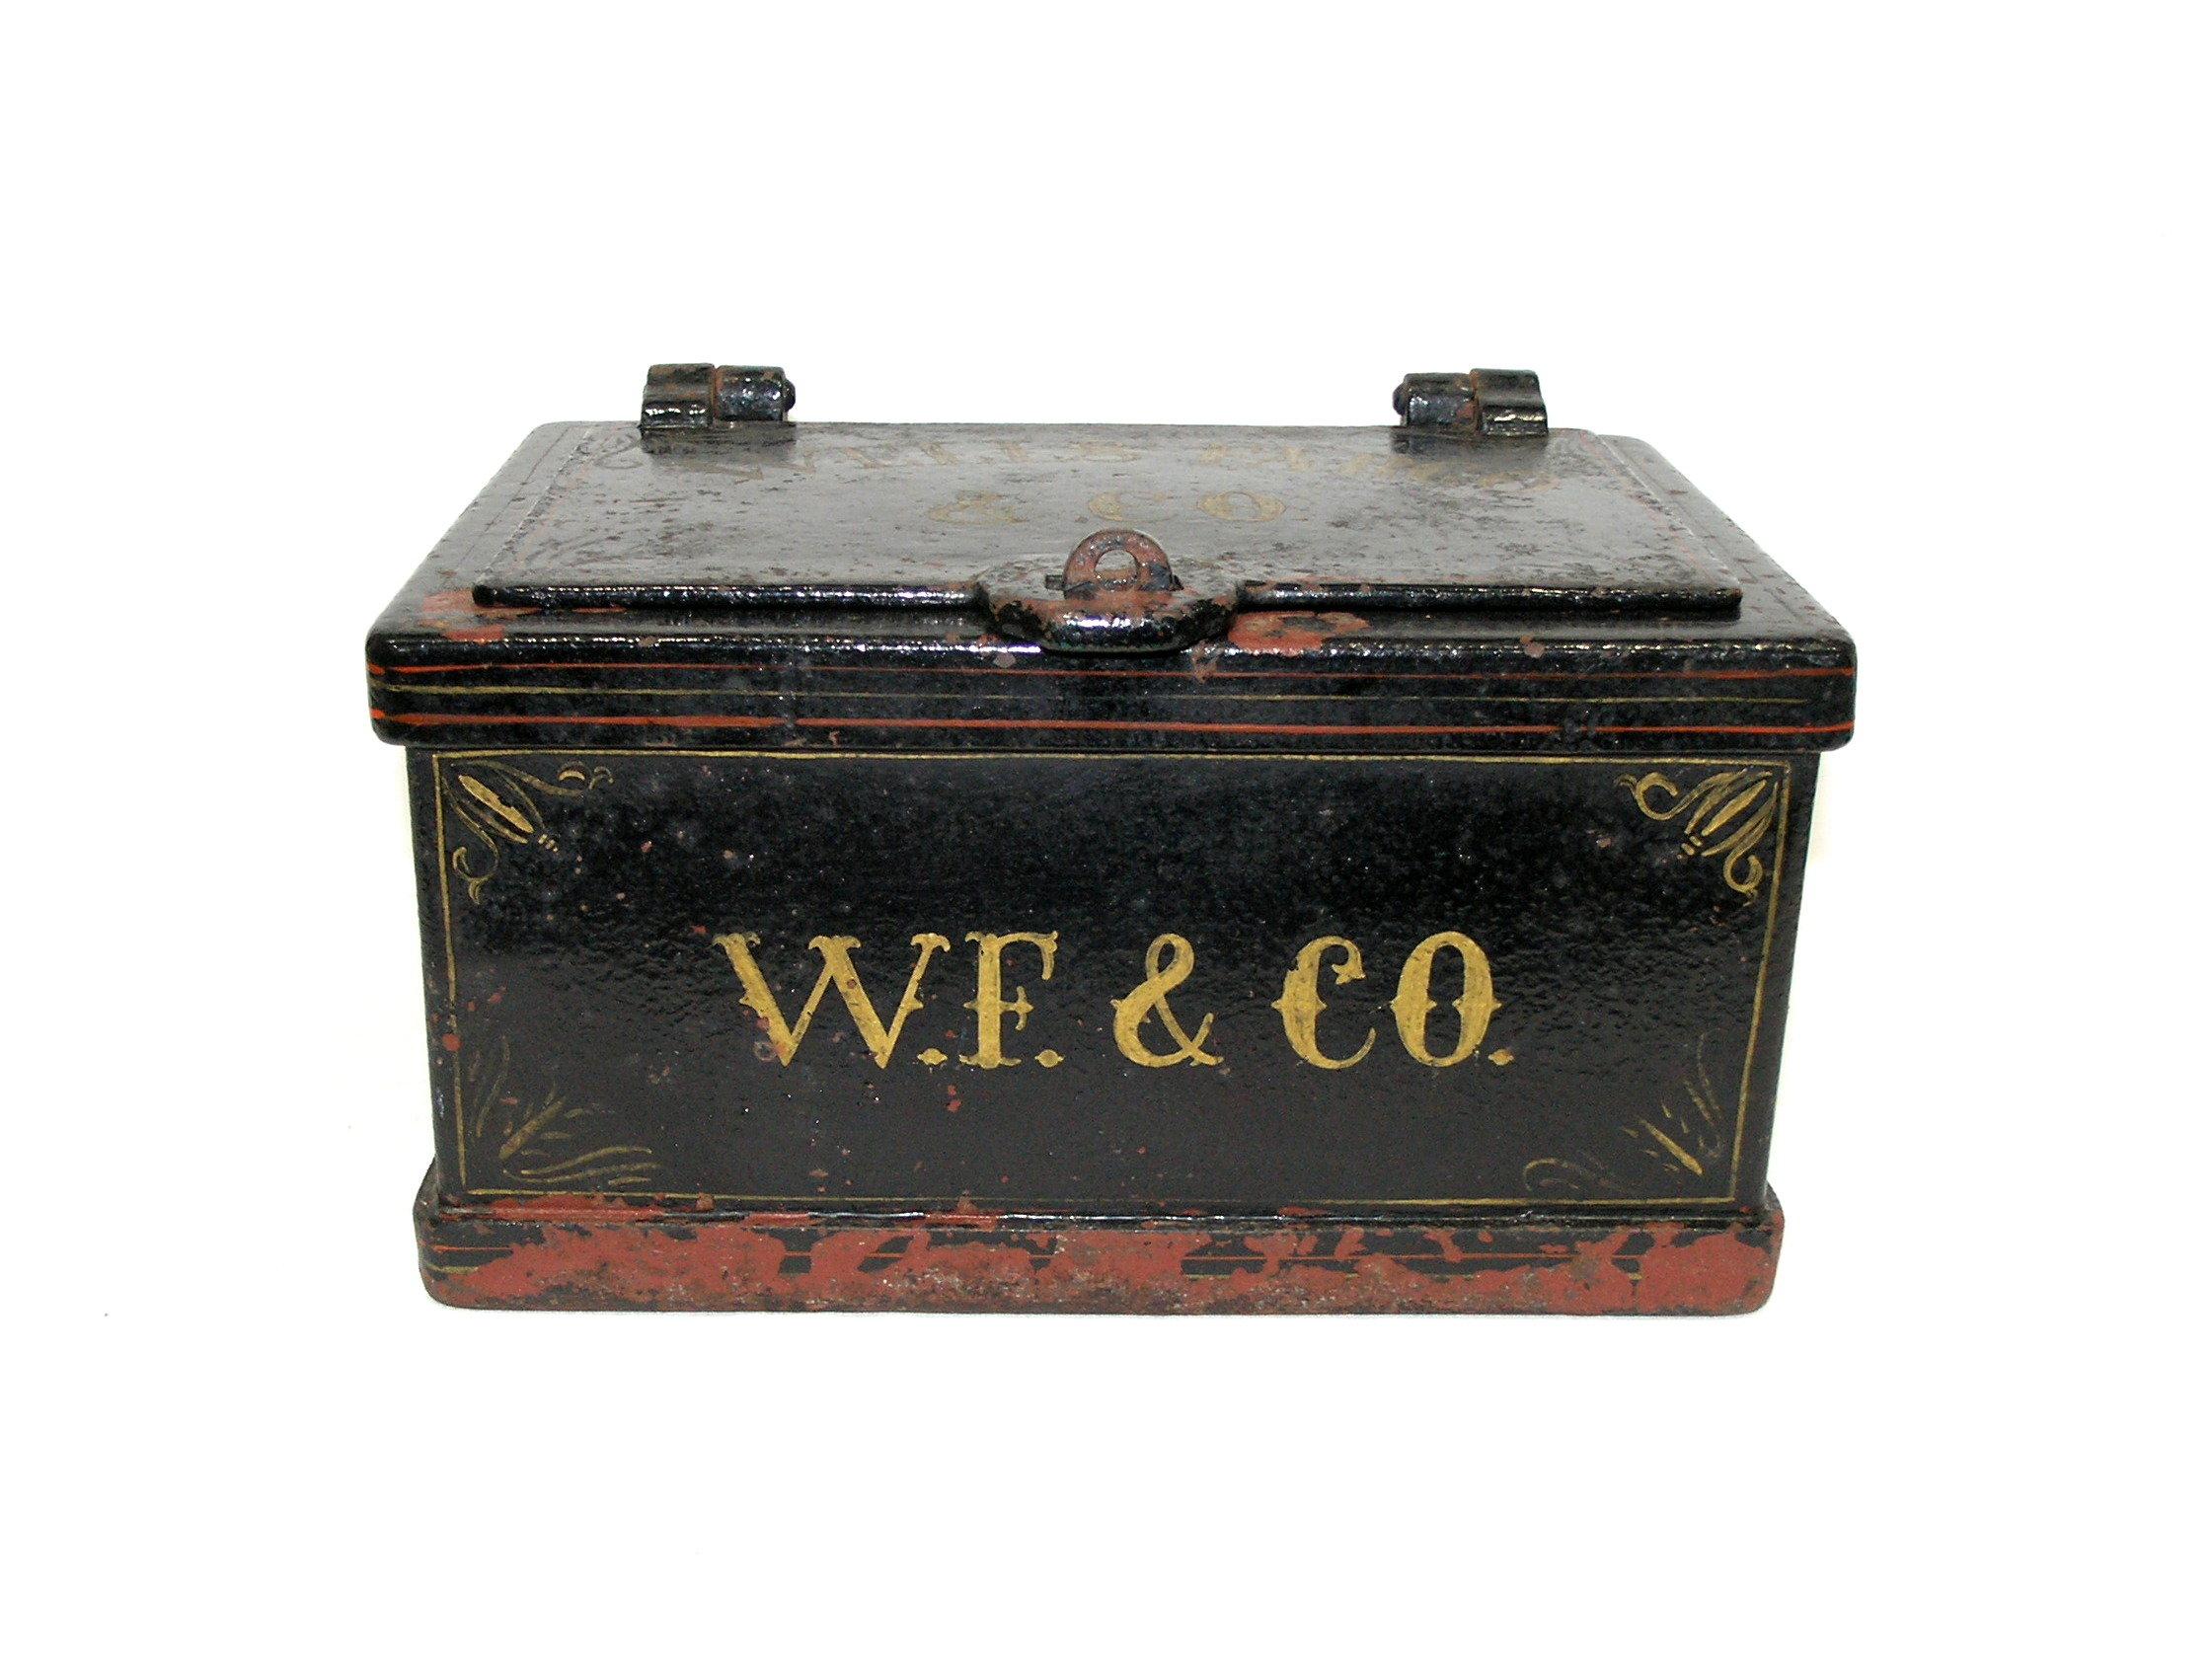 1870s-1880s Wells Fargo & Co. Railroad/Stagecoach Fireproof Strong Box with